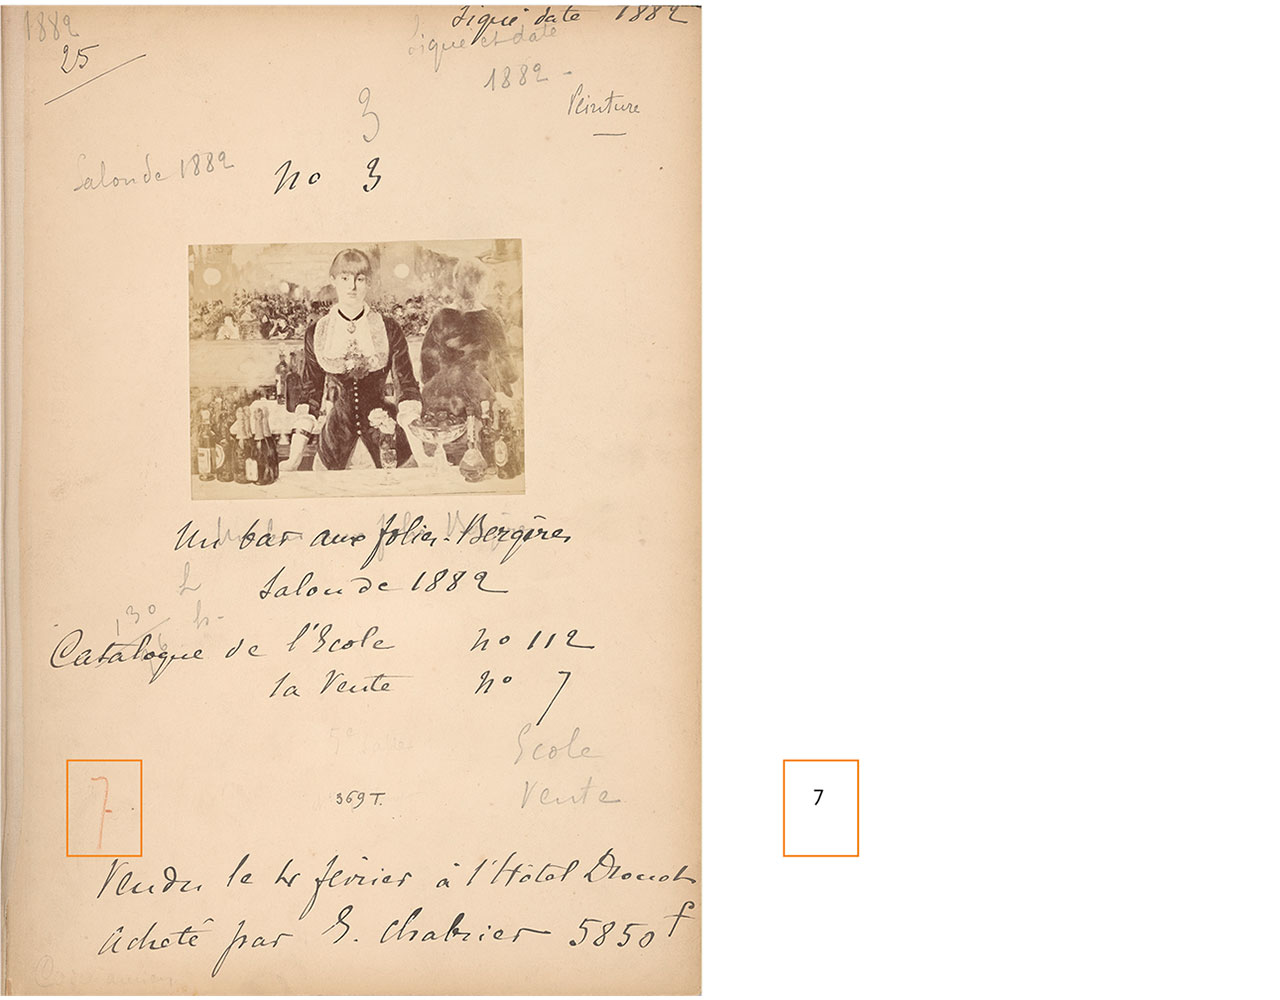 Album page with sepia photograph of Manet's painting with hand-written text above and below.